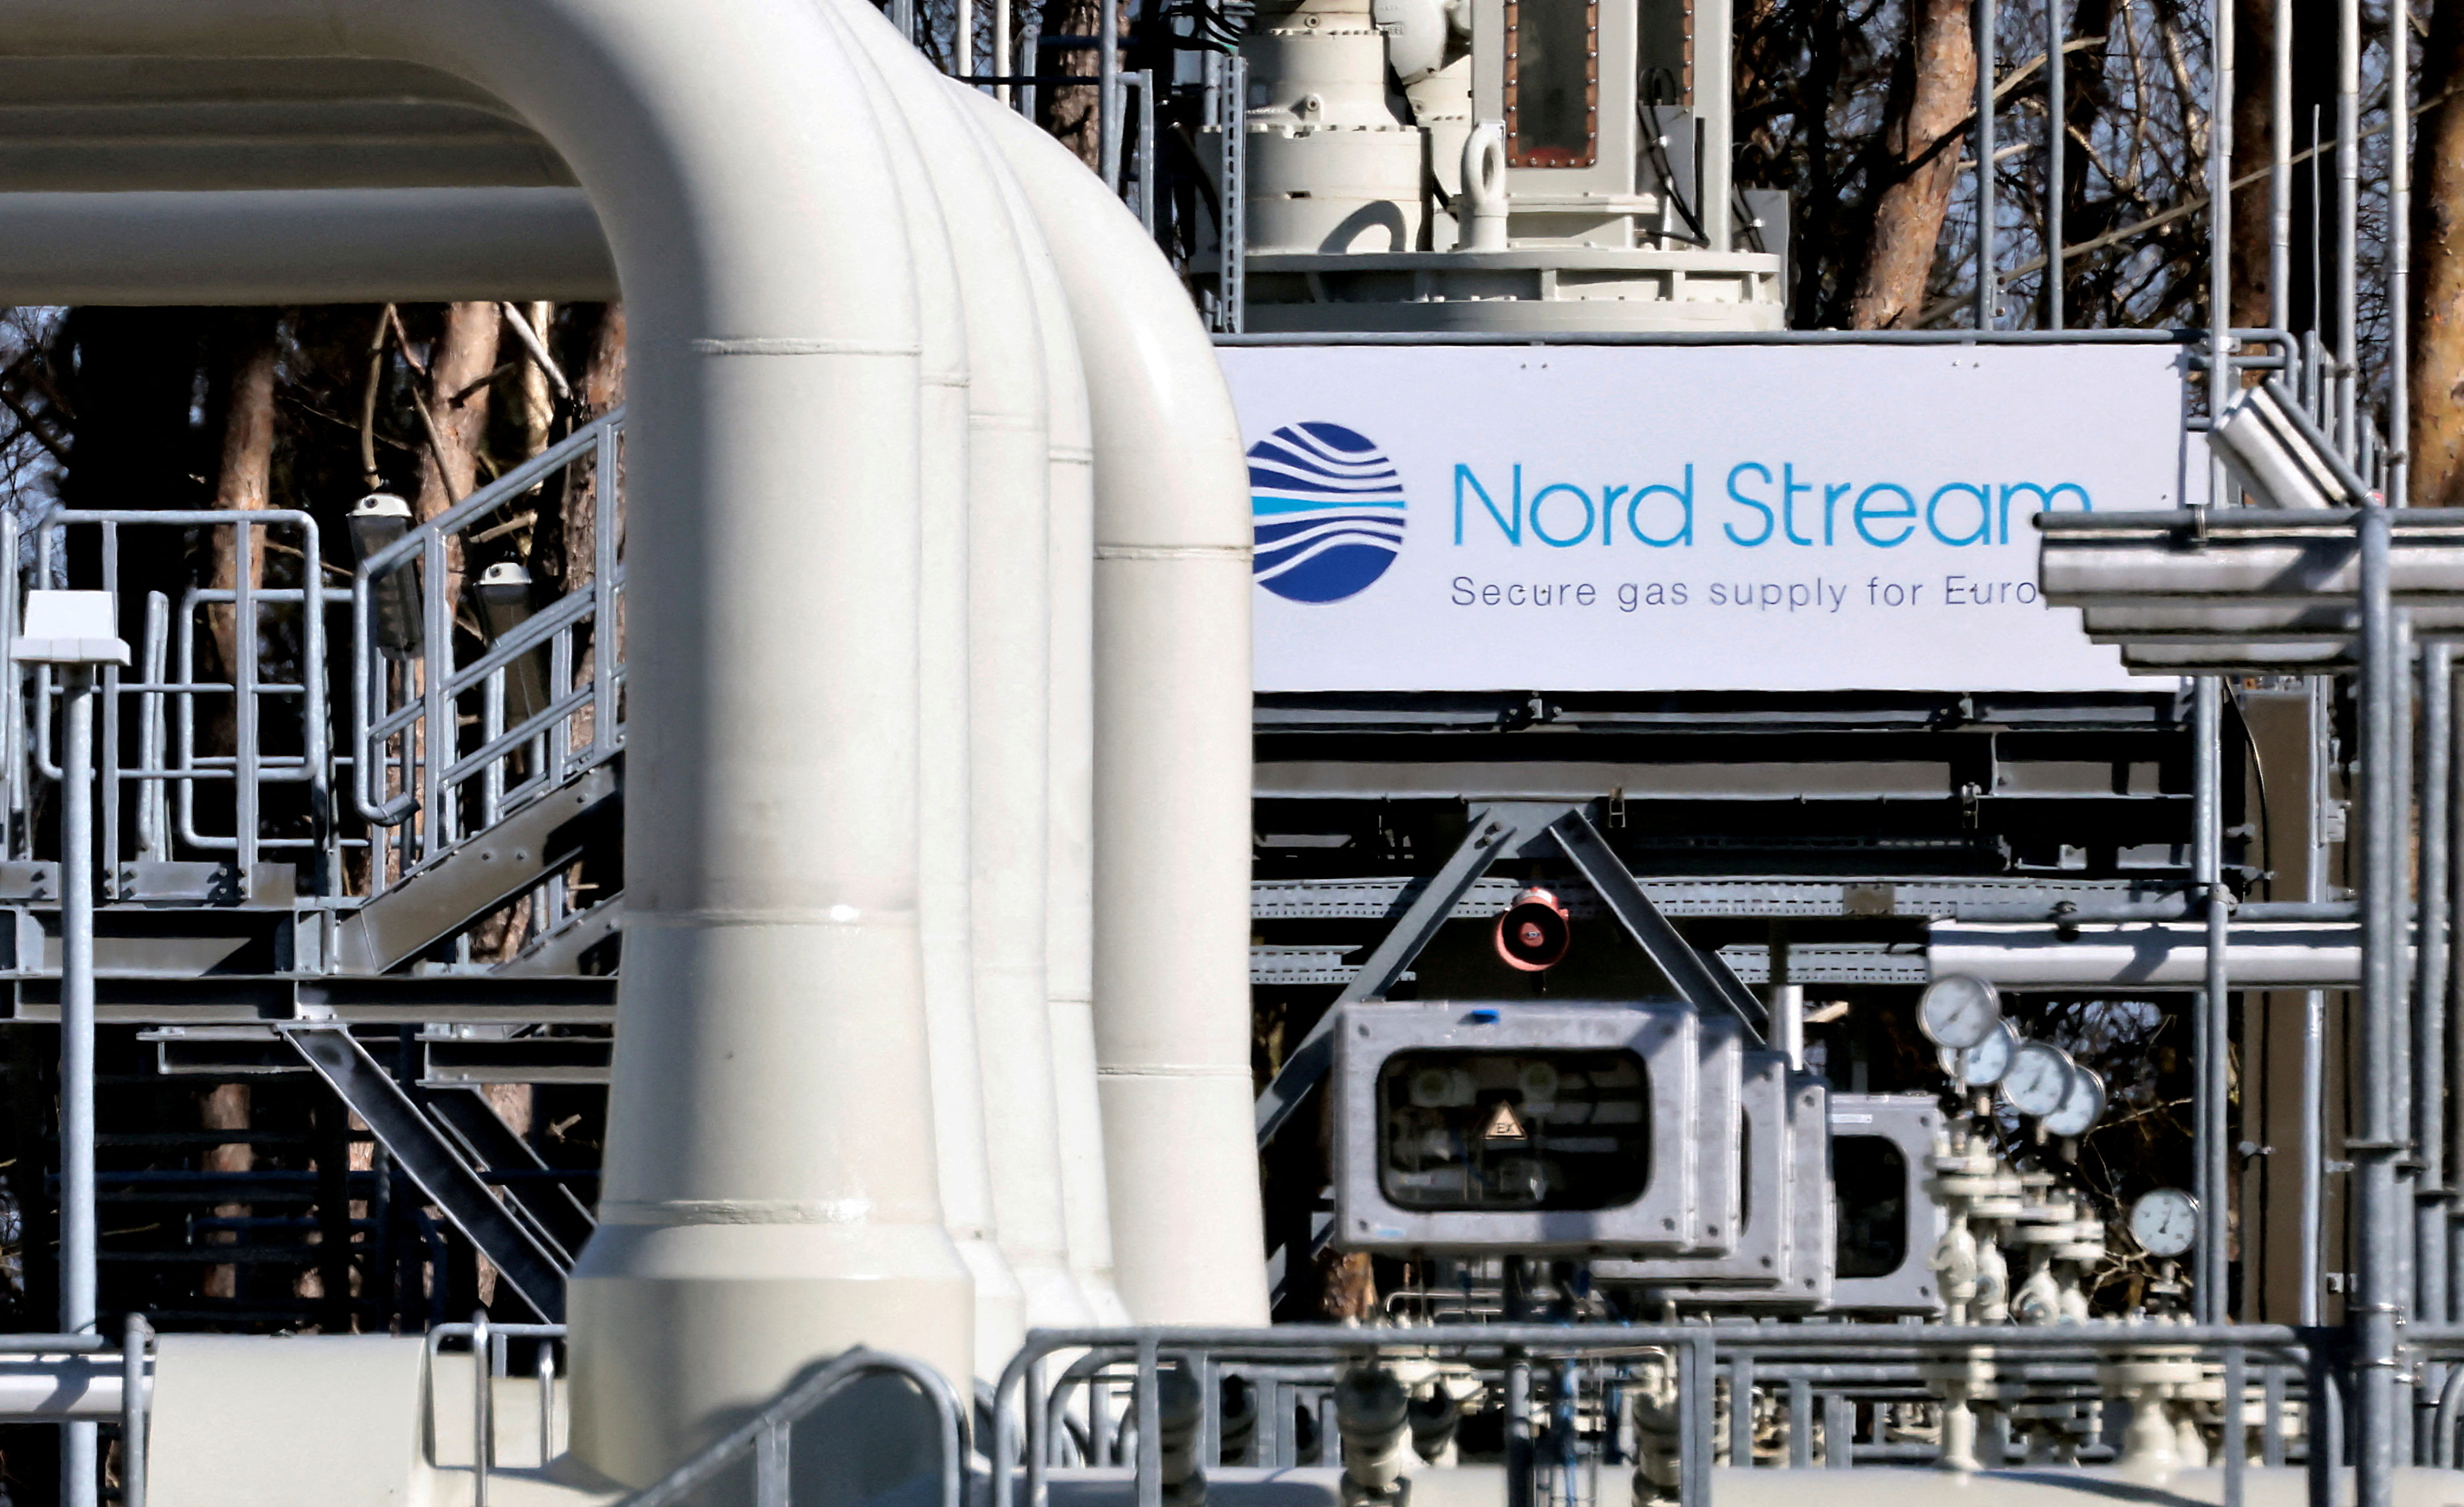 Pipes at the landfall facilities of the 'Nord Stream 1' gas pipline in Lubmin